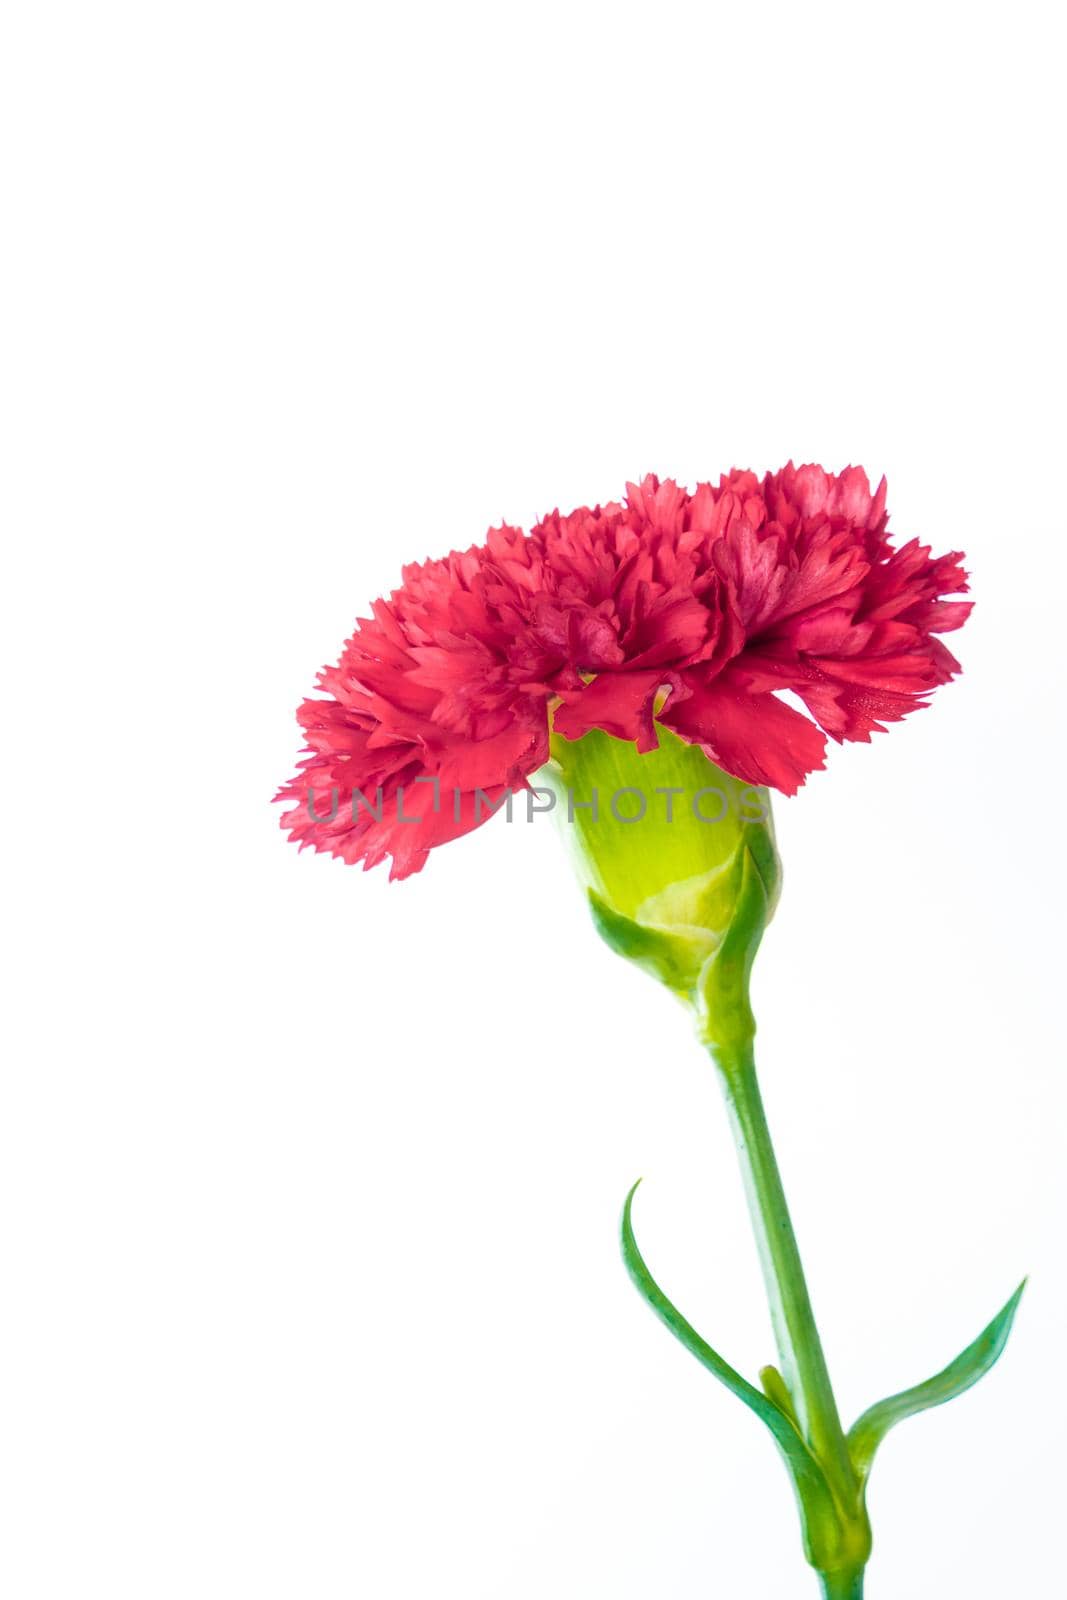 Realistic vivid red carnation  (Dianthus caryophyllus) blooming flower isolated on white background